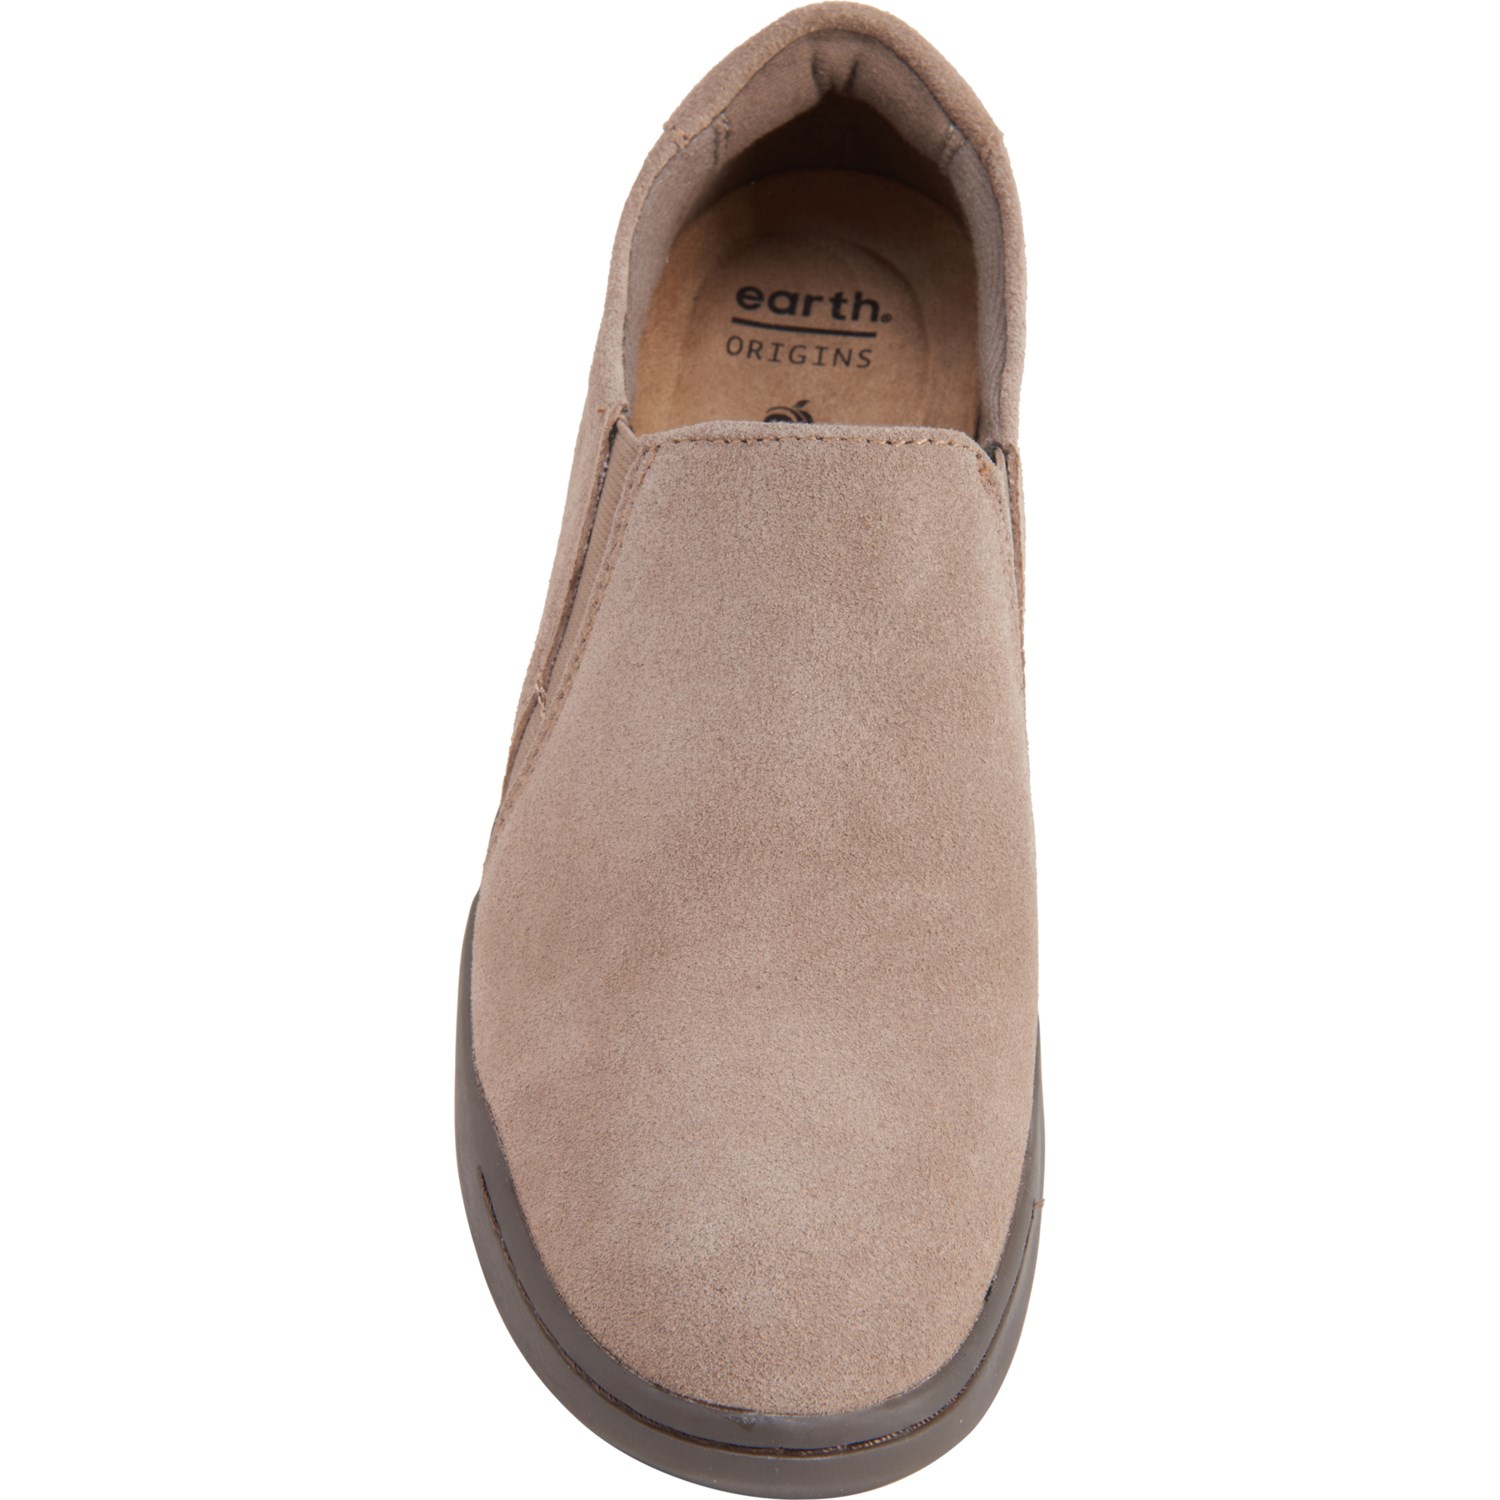 Earth Origins Swift Silas Shoes- Suede, Slip-Ons (For Women) - Save 75%